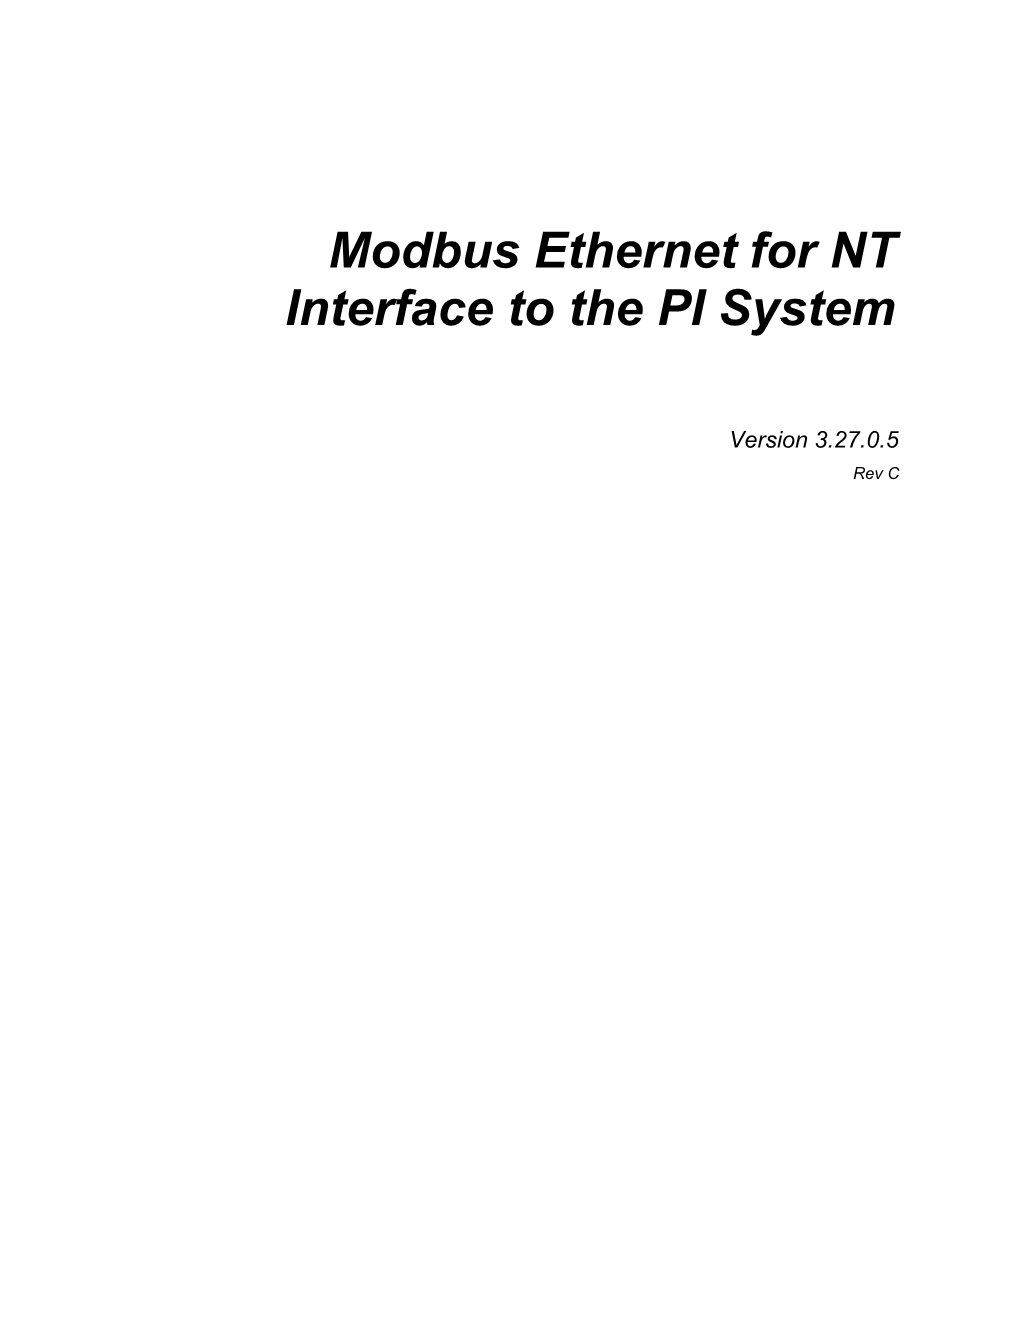 Modbus Ethernet for NT Interface to the PI System